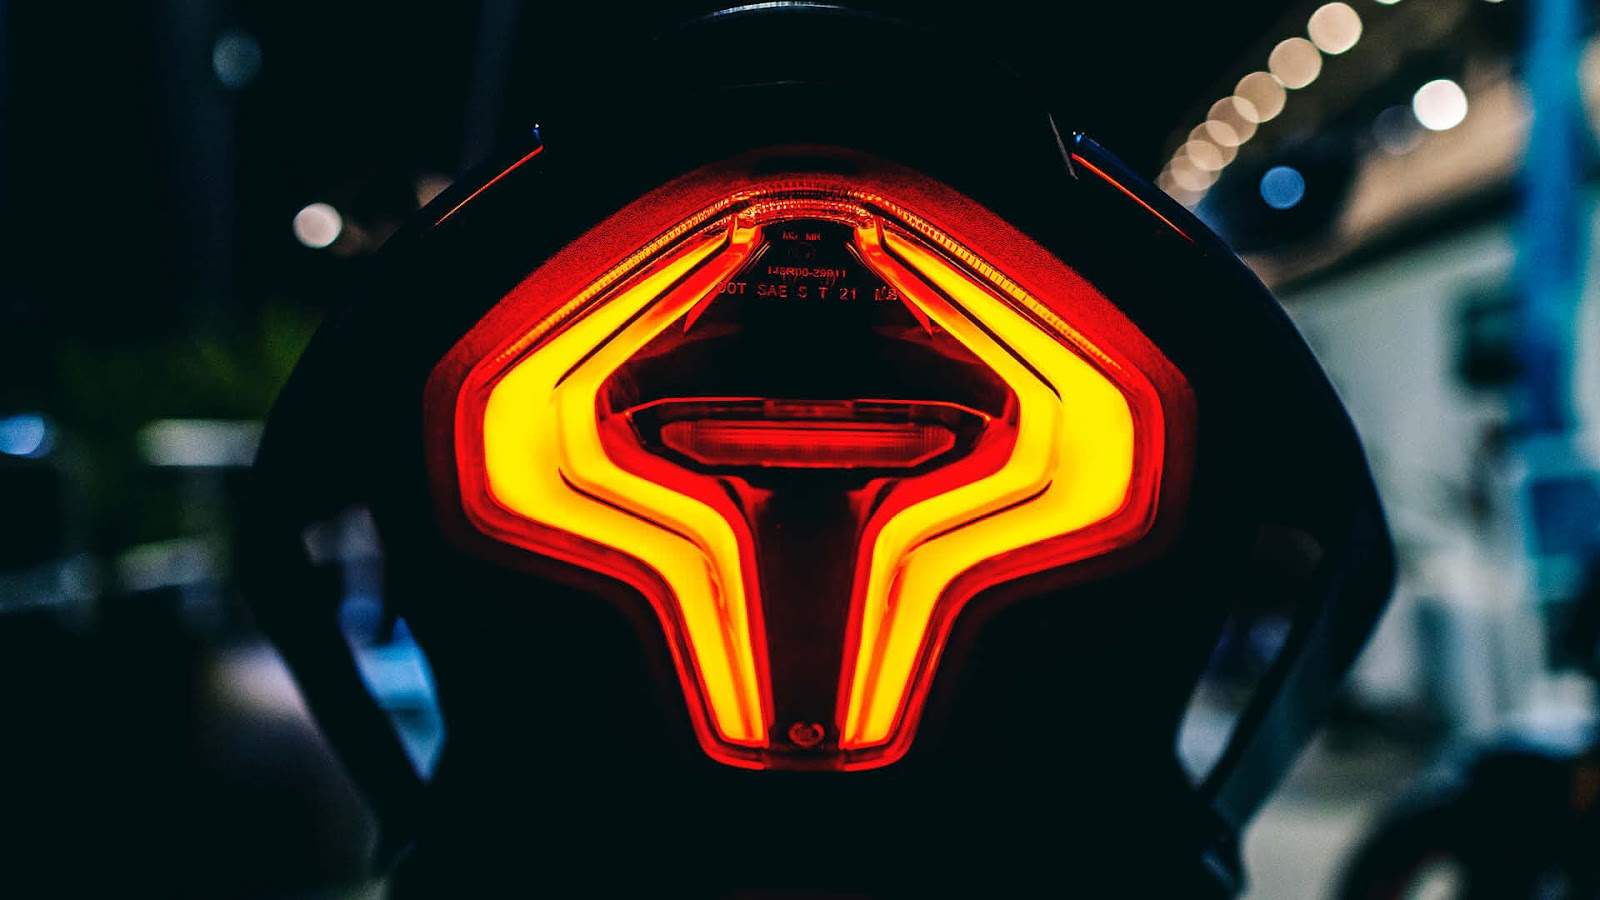 If in the front we have aesthetic aggressiveness, in the rear light we can say that refinement and good taste are the dominant note.